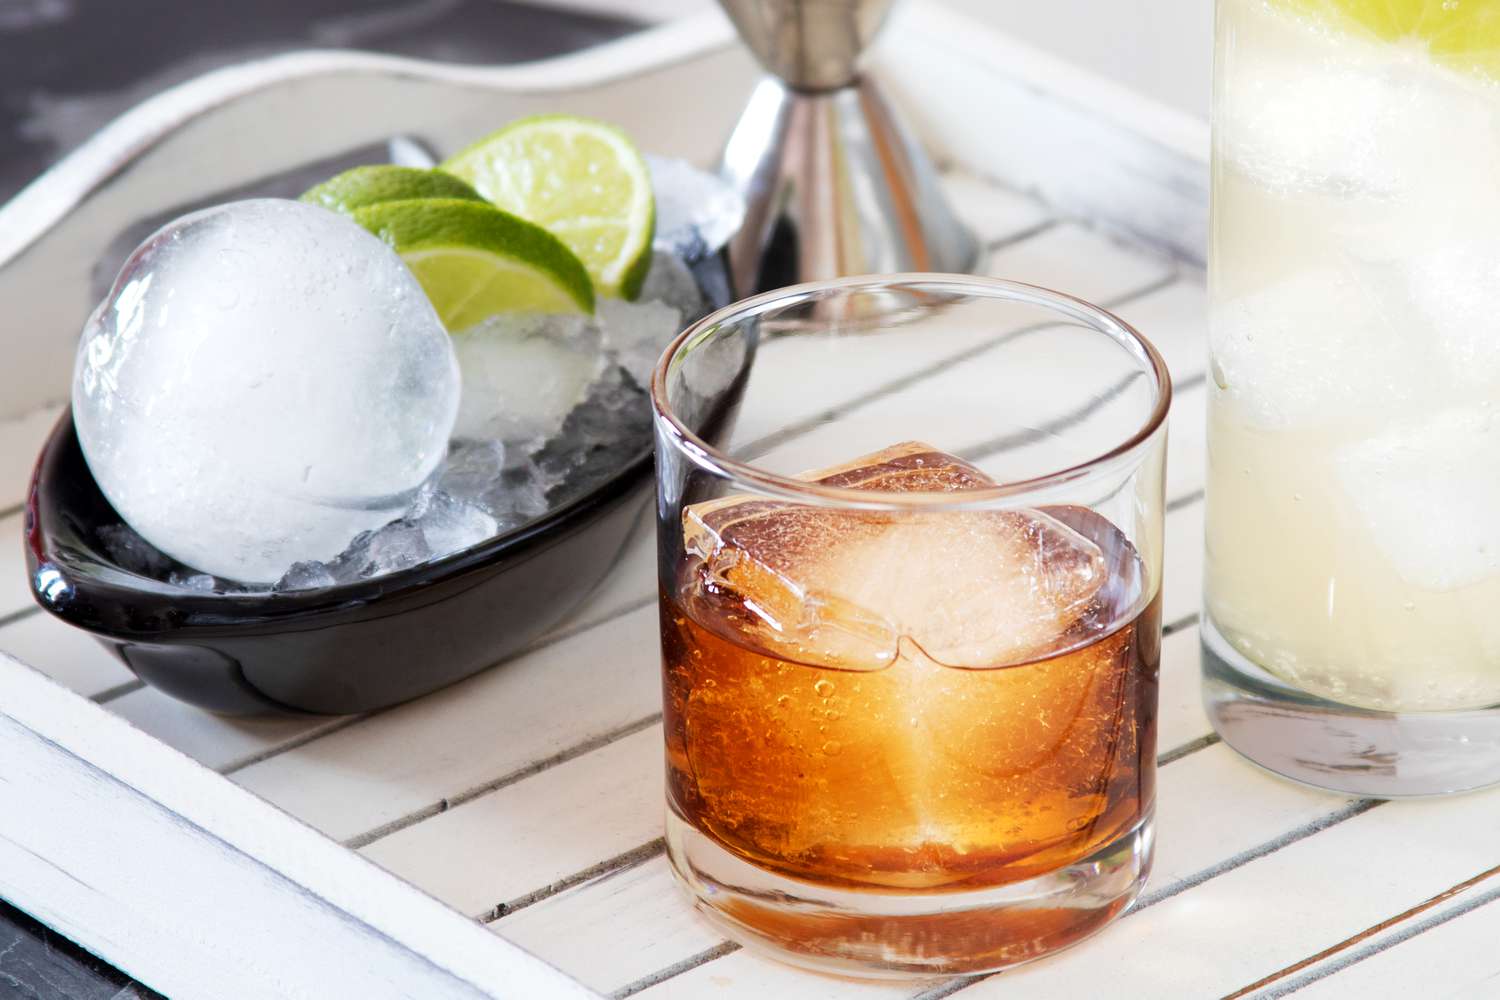 A bowl of ice and cut limes sits beside a glass of whiskey.